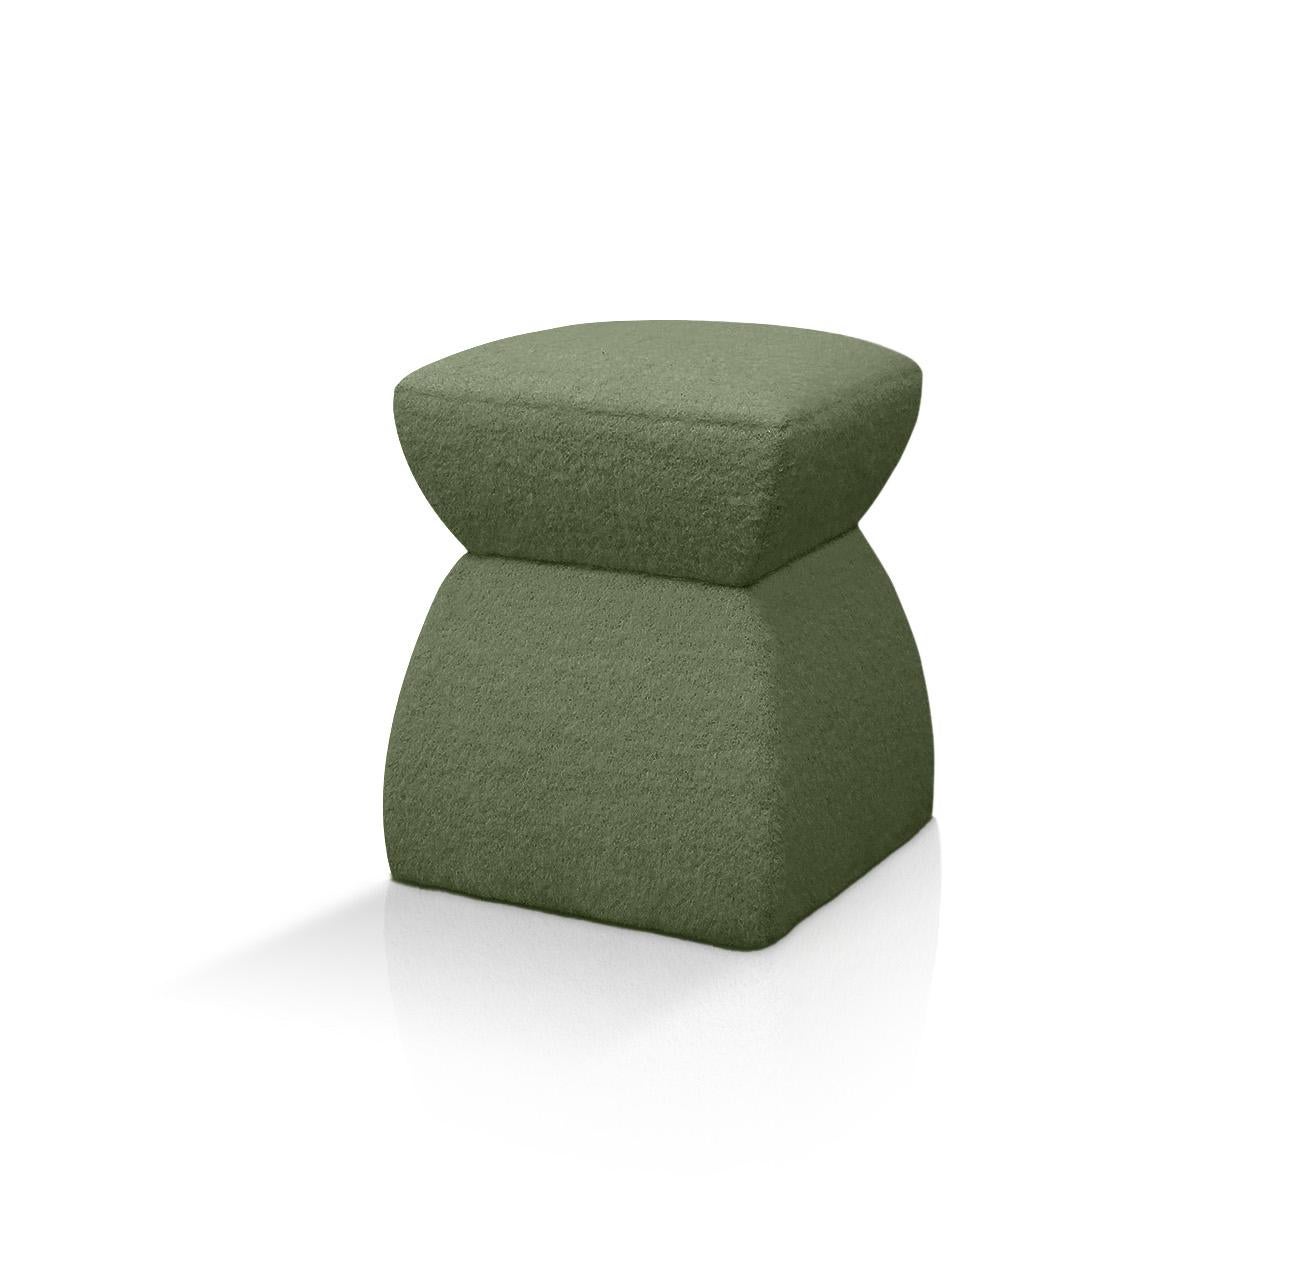 This fun yet Classic pouf is indeed a celebration of the Romanian sculptor Constantin Brâncusi’s contribution to modernism, referencing one of his most celebrated work, Infinite Column. High-grade plain weaves of wool, mohair and long-haired alpaca